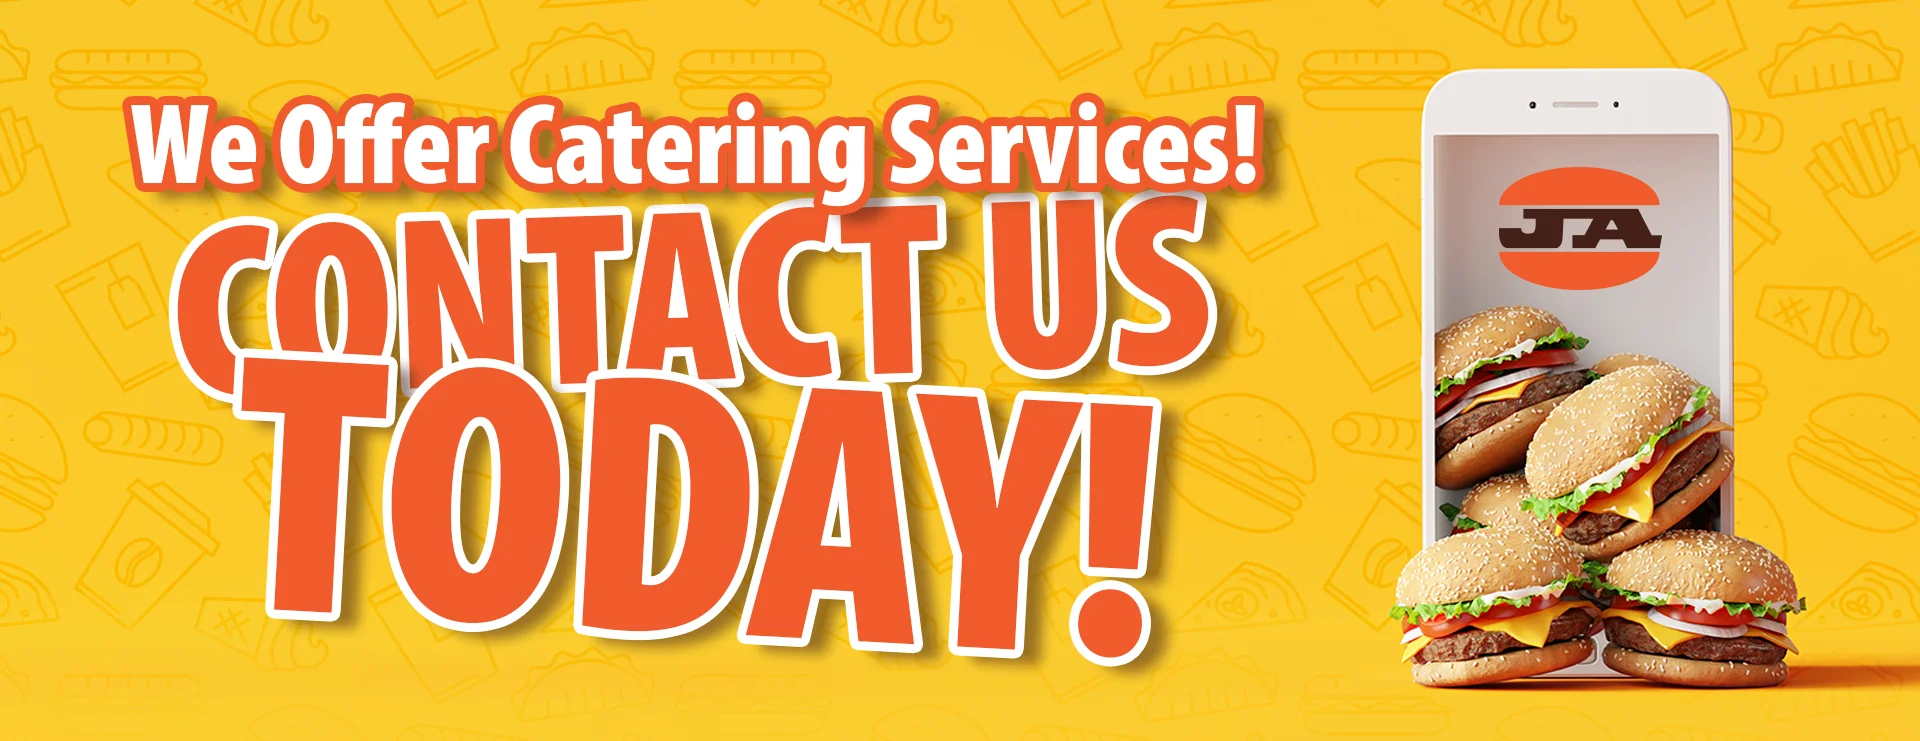 We offer catering services! Contact us today!